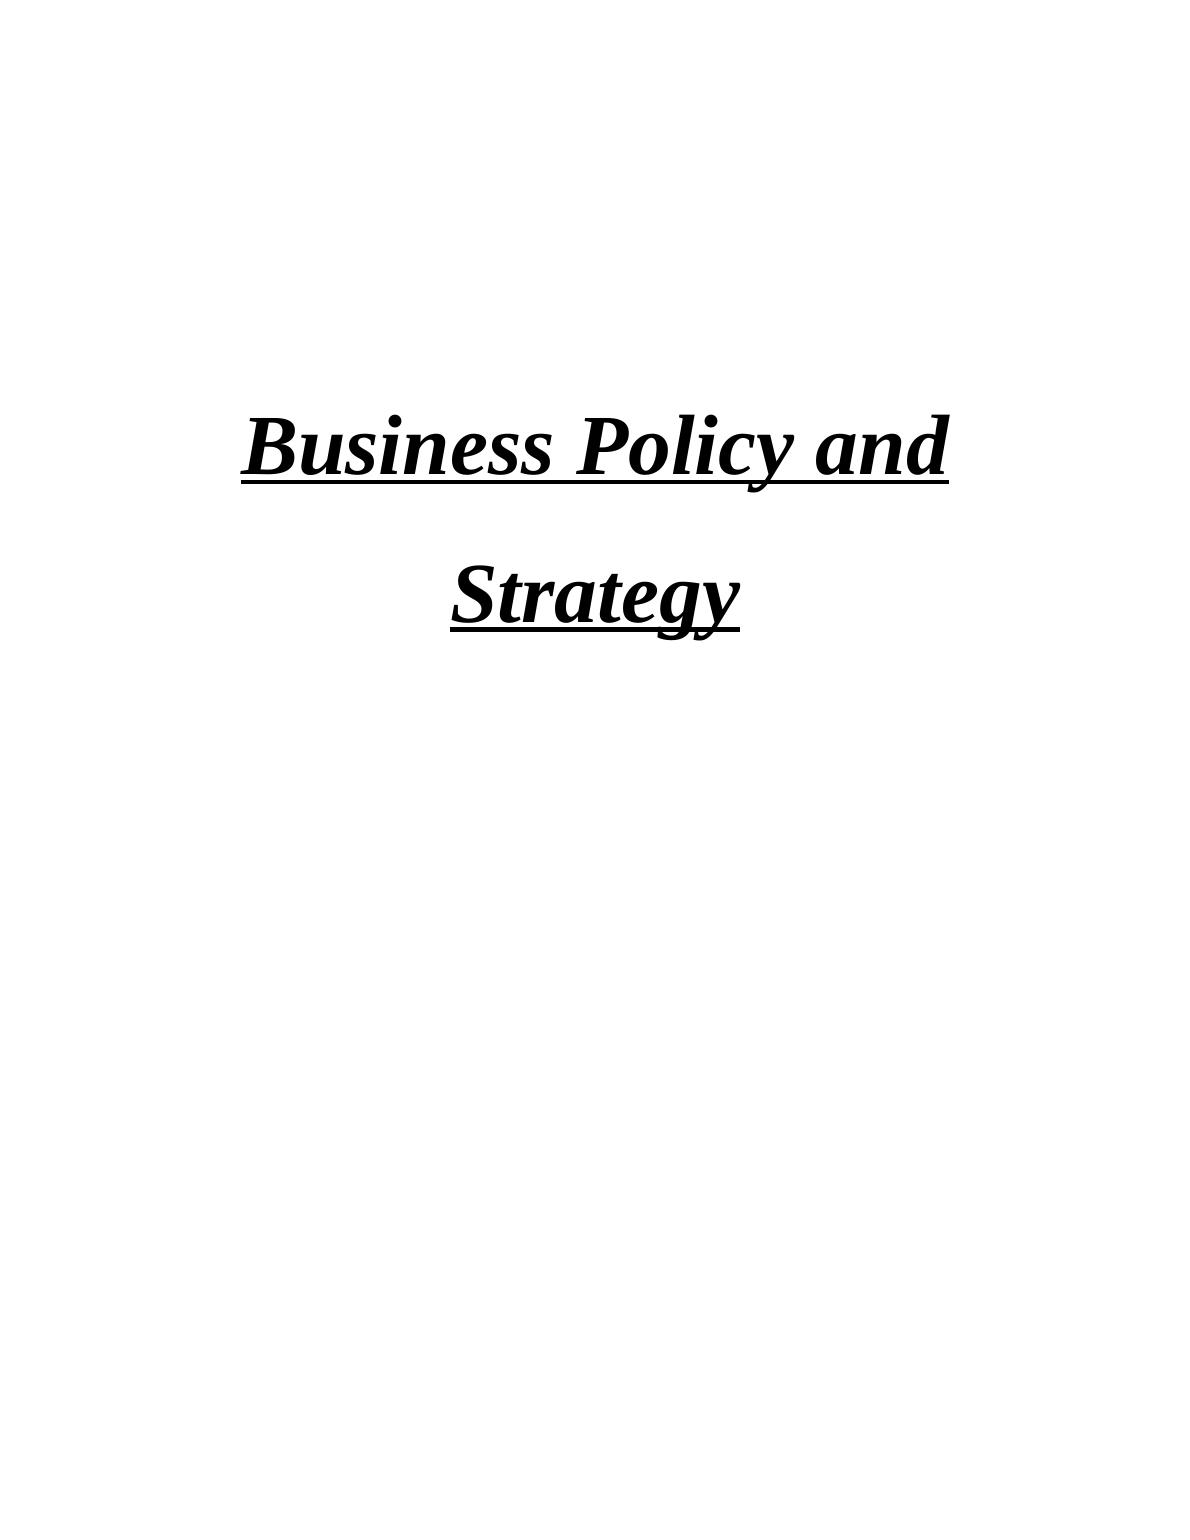 Business Policy and Strategy INTRODUCTION_1